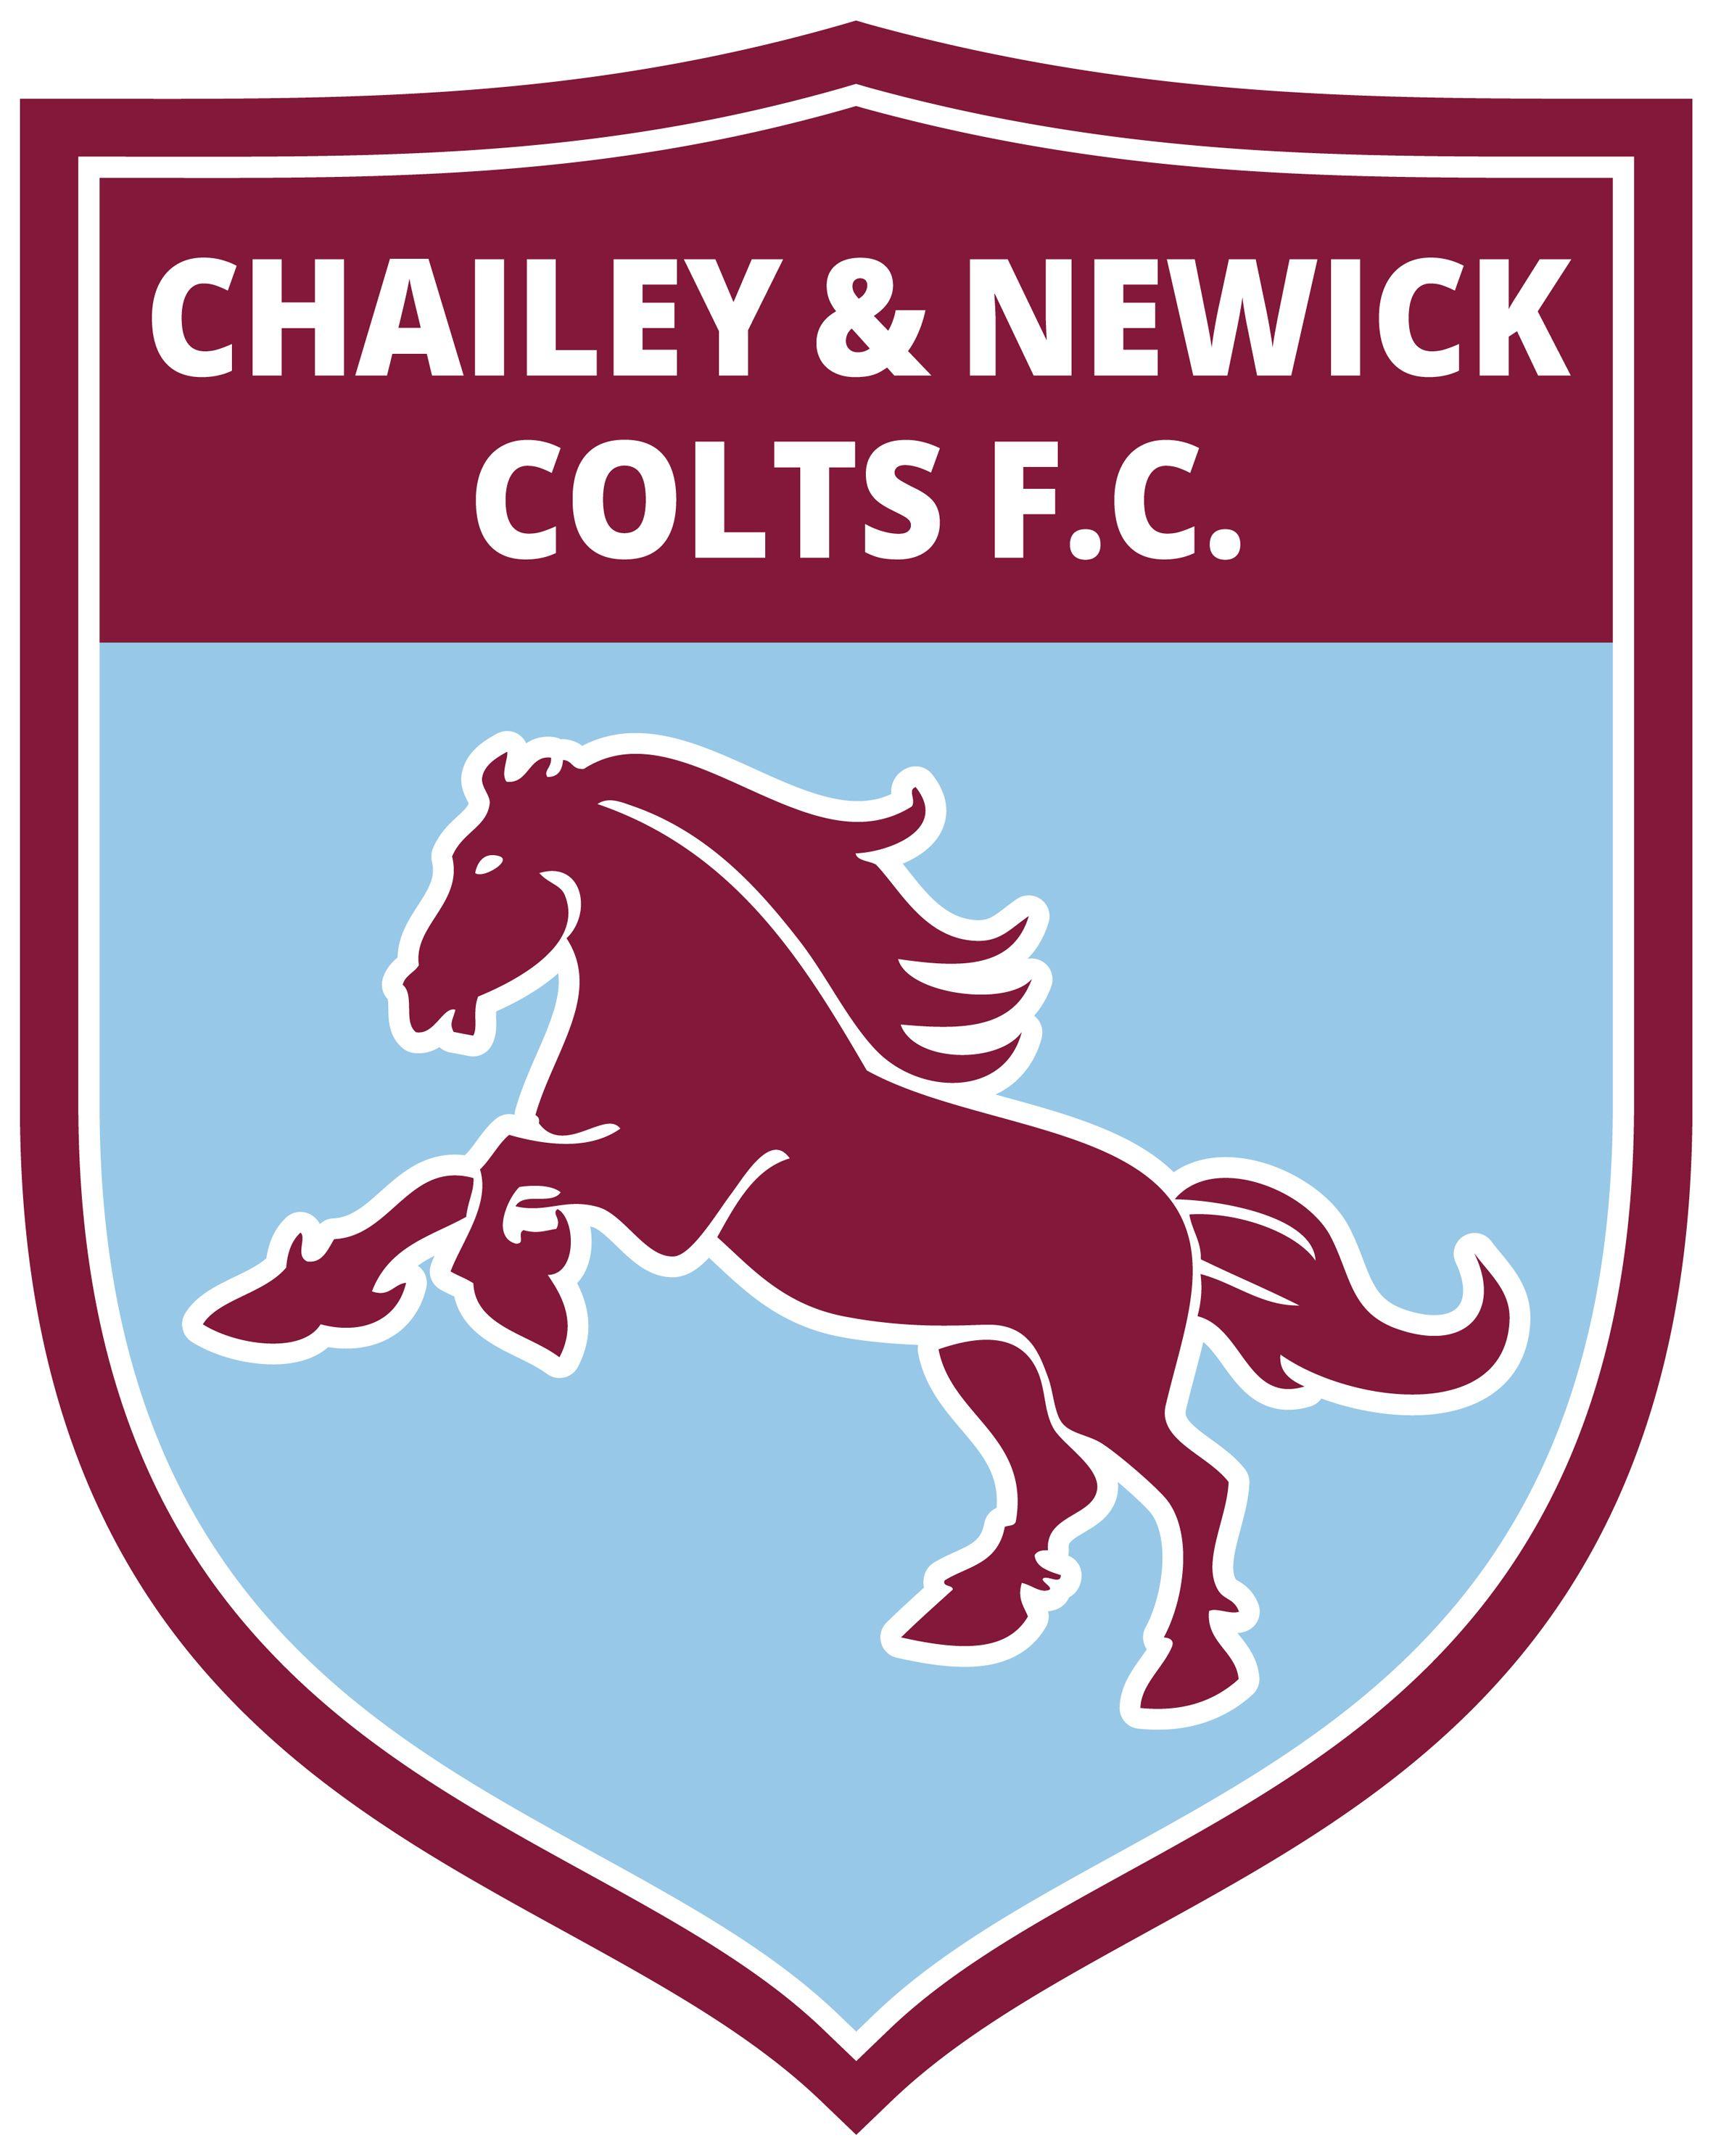 Horse Football Logo - Chailey and Newick Colts Football Club - Code of Conduct